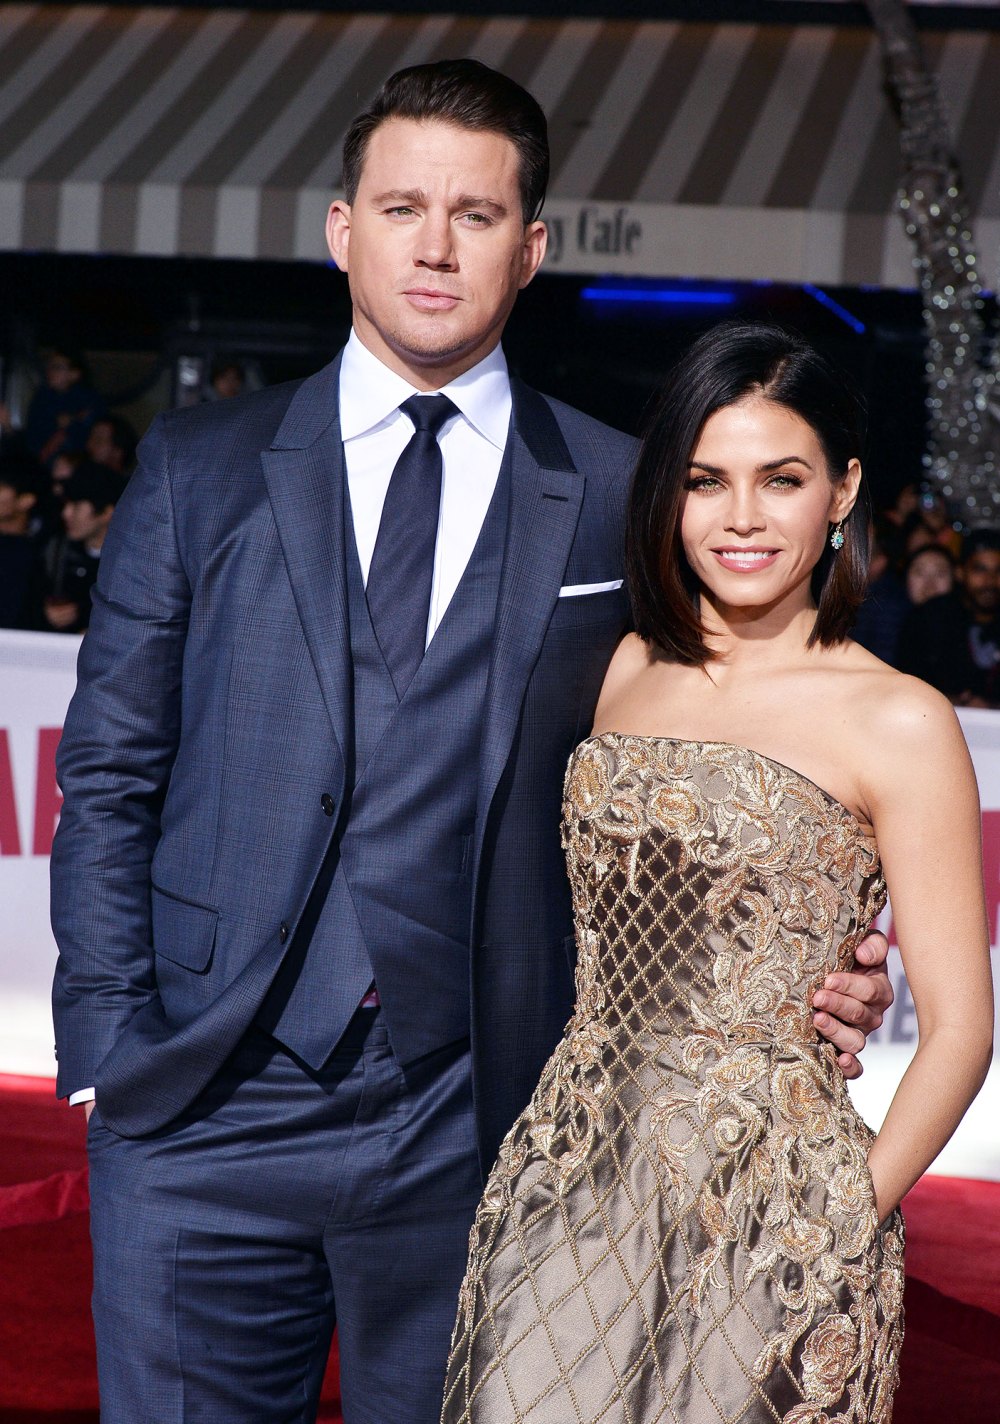 Jenna Dewan Sends Sweet Message to Ex Channing Tatum After the Loss of His Good Friend: 'All the Love in the World'